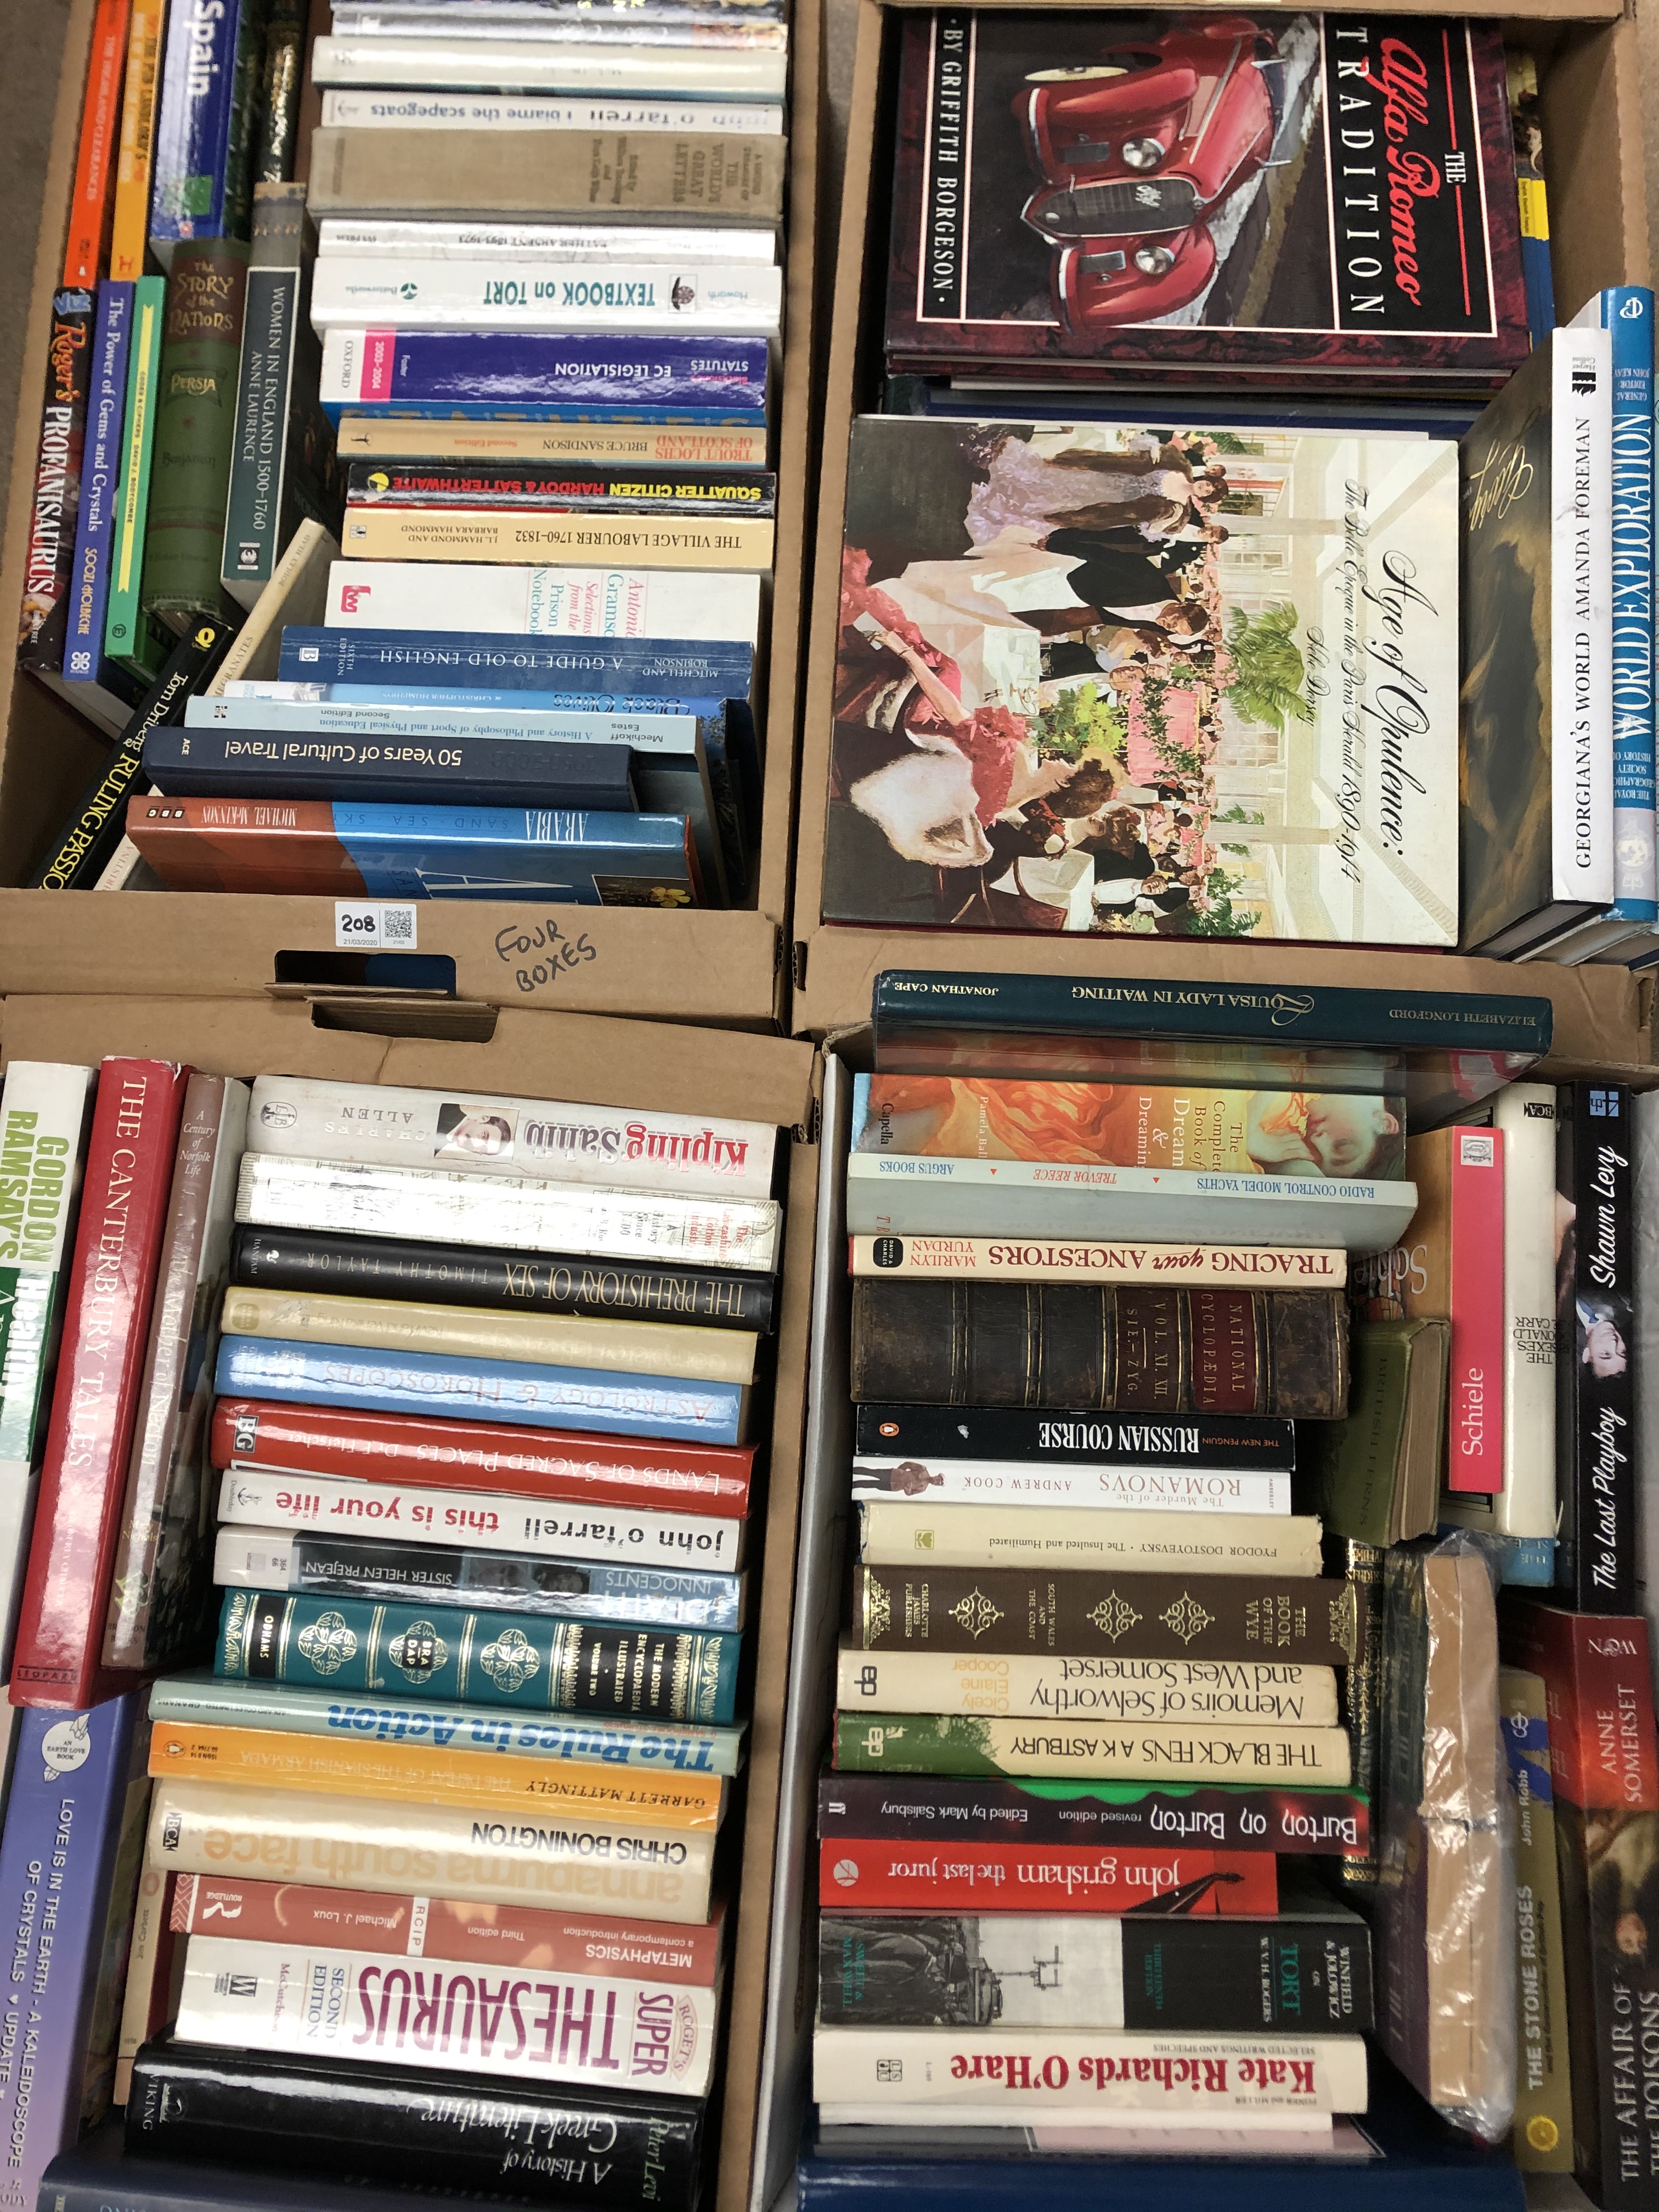 Large quantity of assorted books including fiction and non-fiction, travel, biographical, history,